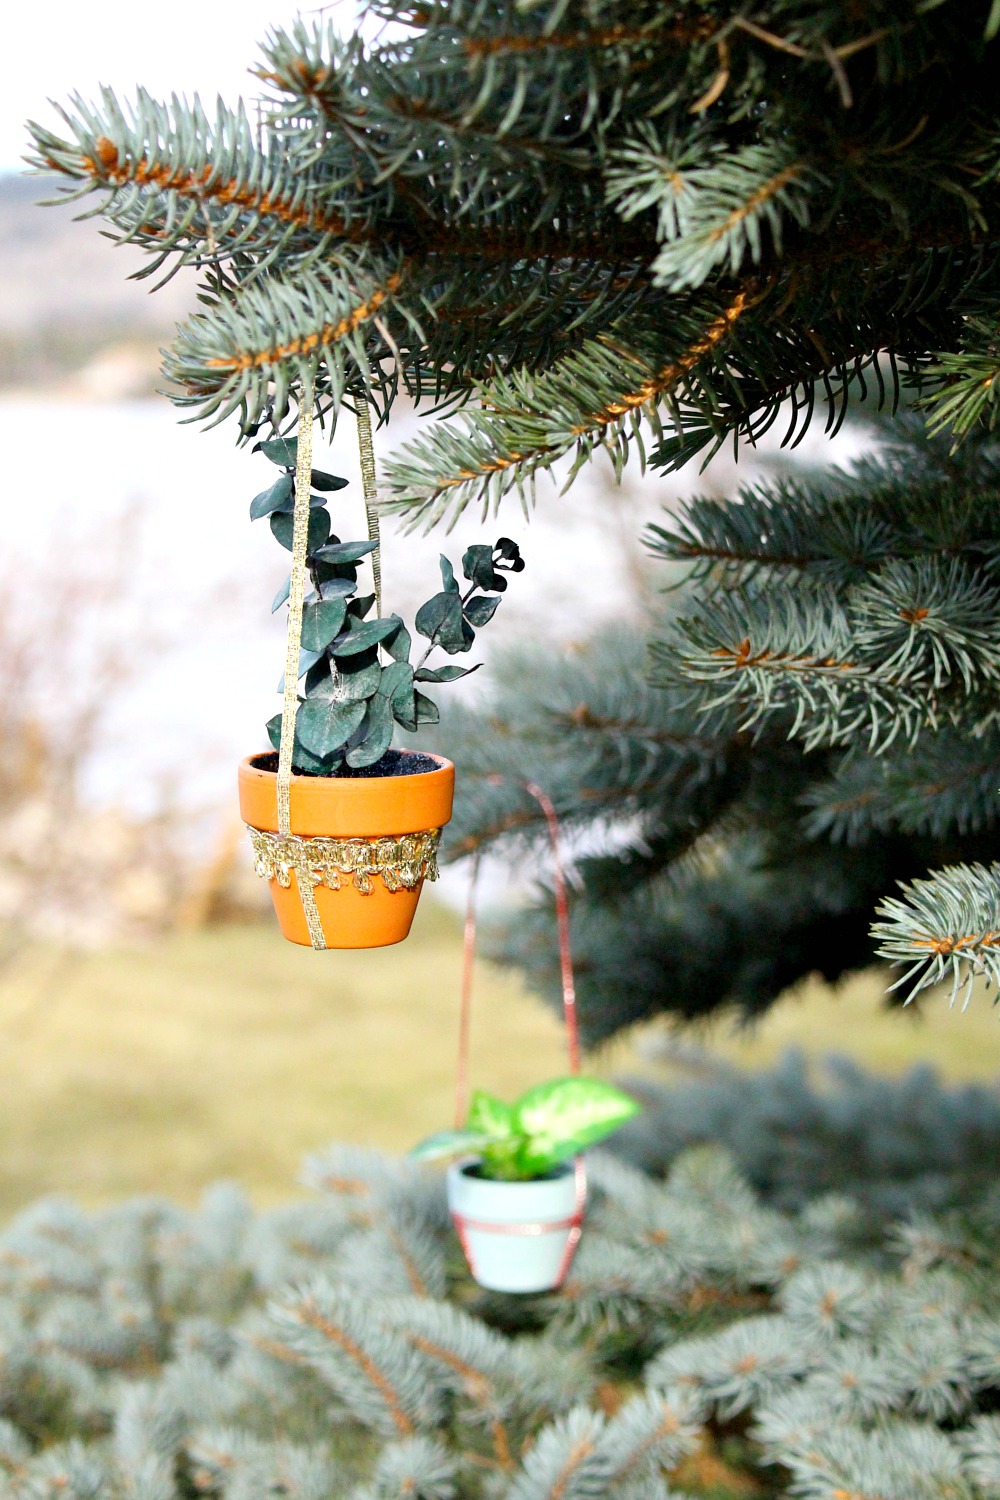 DIY Mini Potted Plant Holiday Ornament